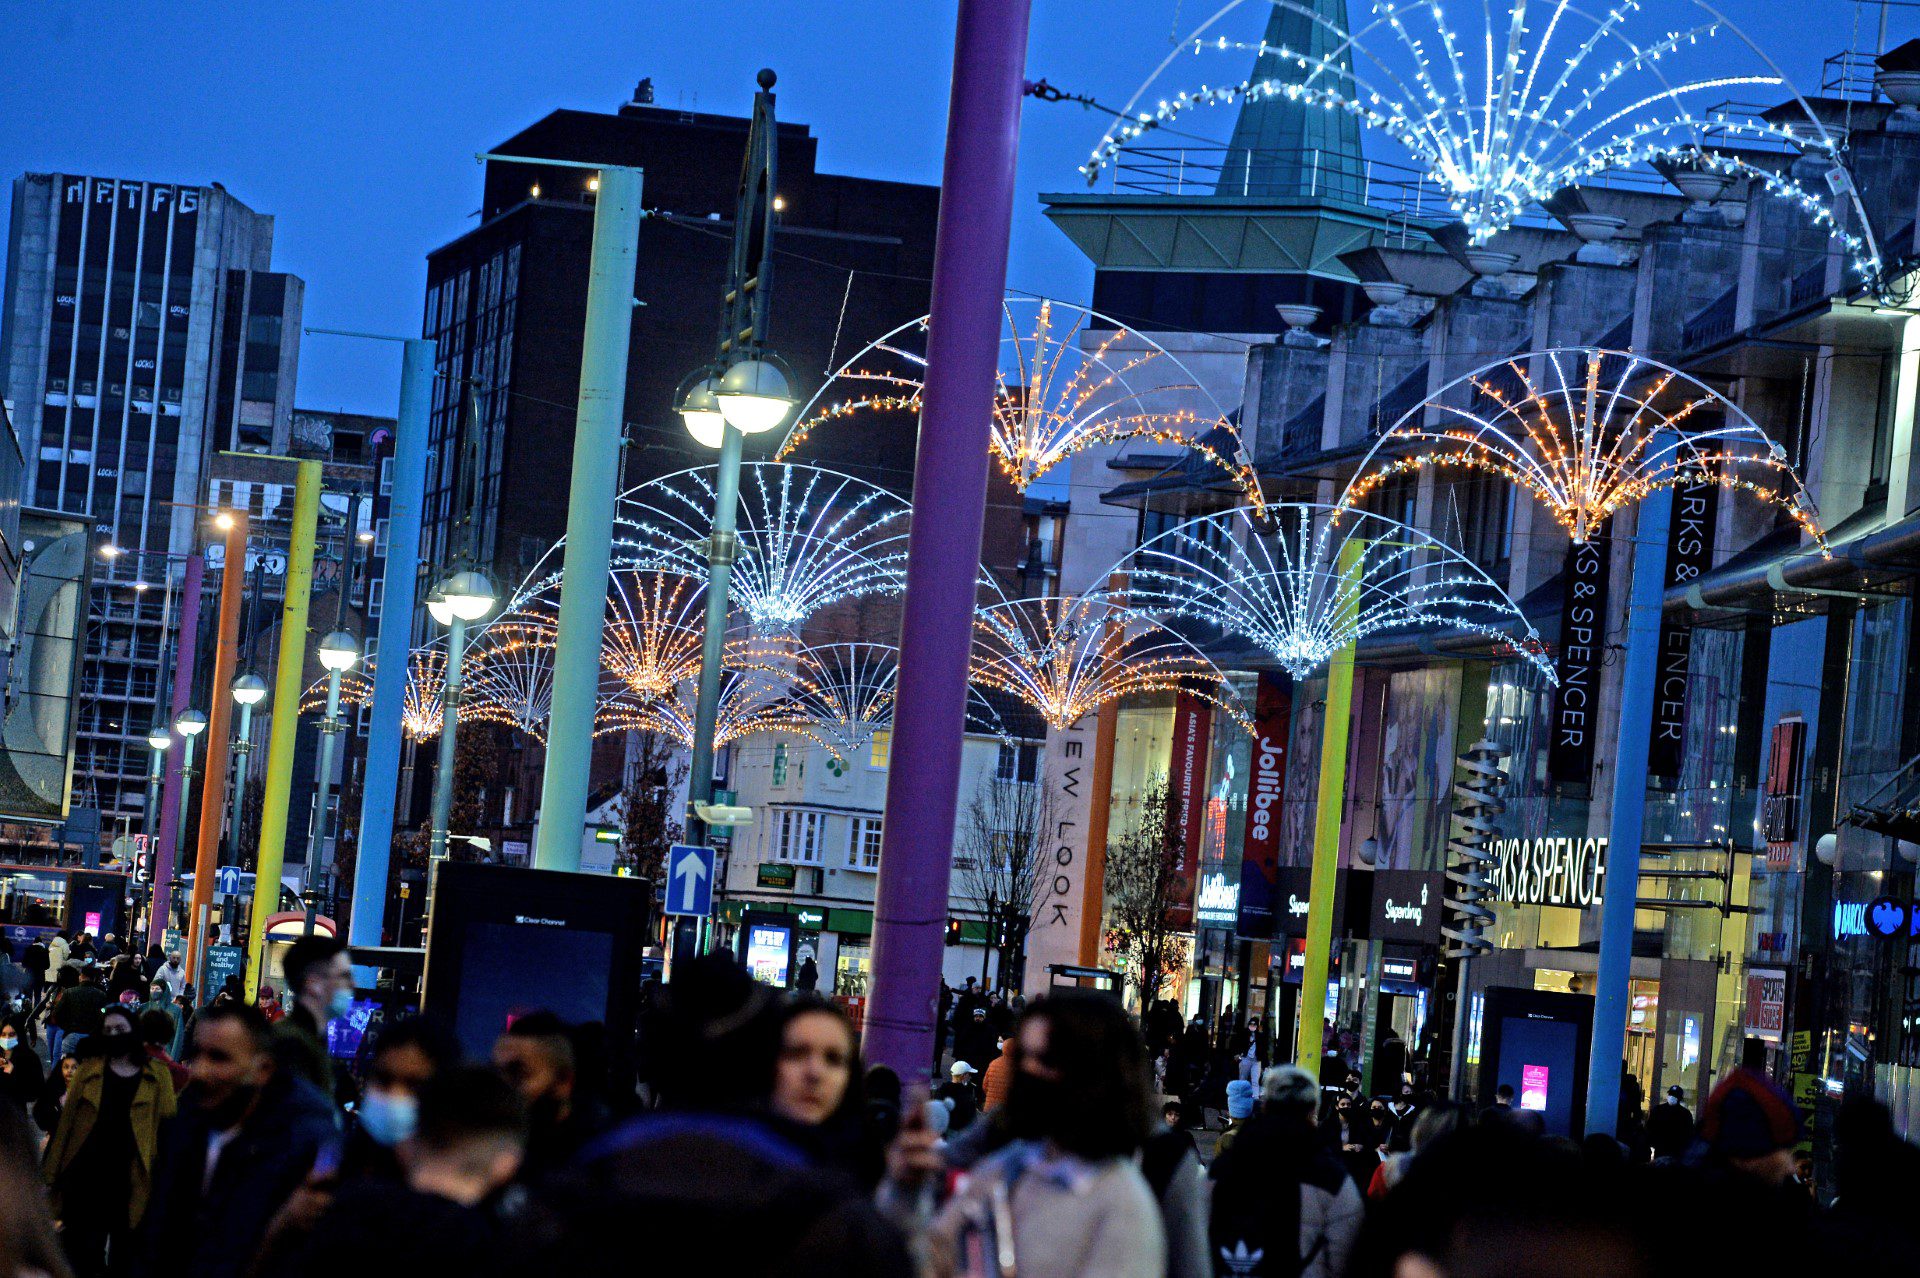 Crowds of people walking under the christmas lights in Leicester City centre